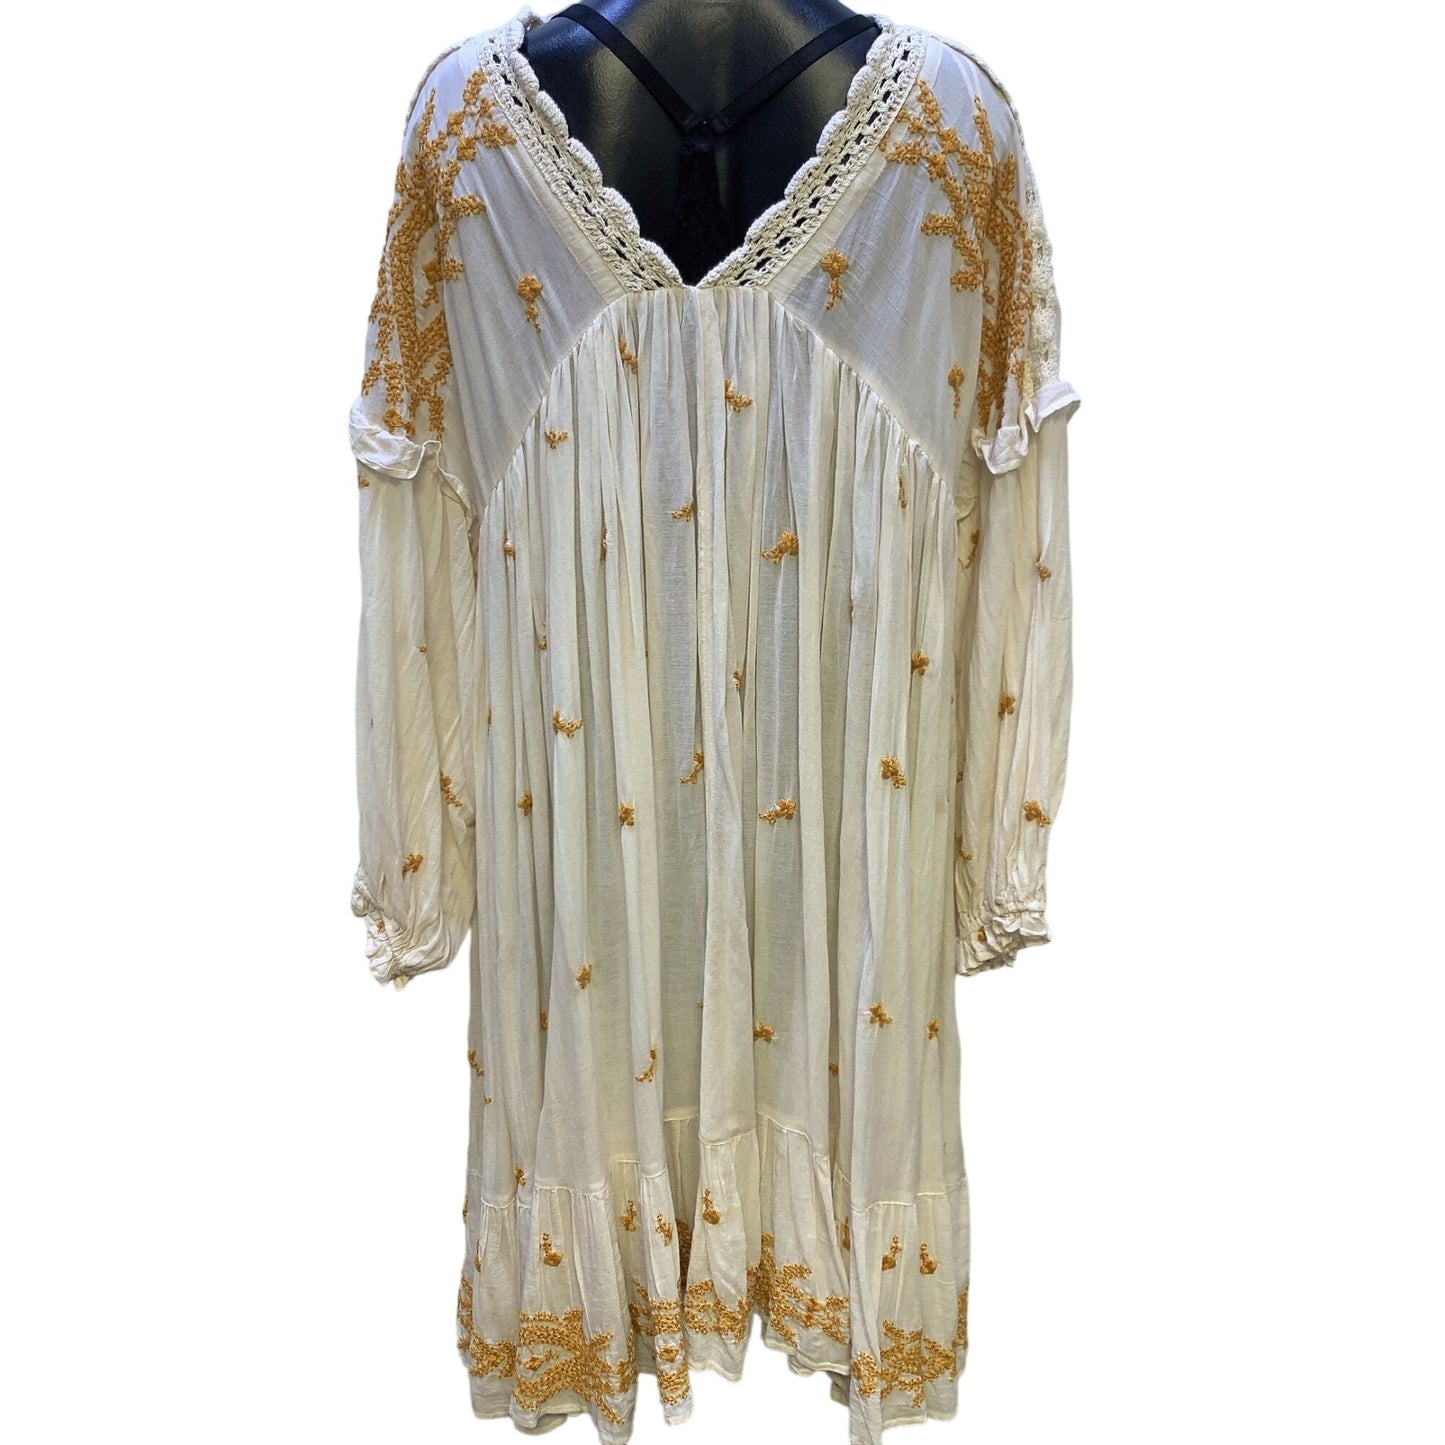 *Free People Ivory & Gold Embroidered Dress X-Small